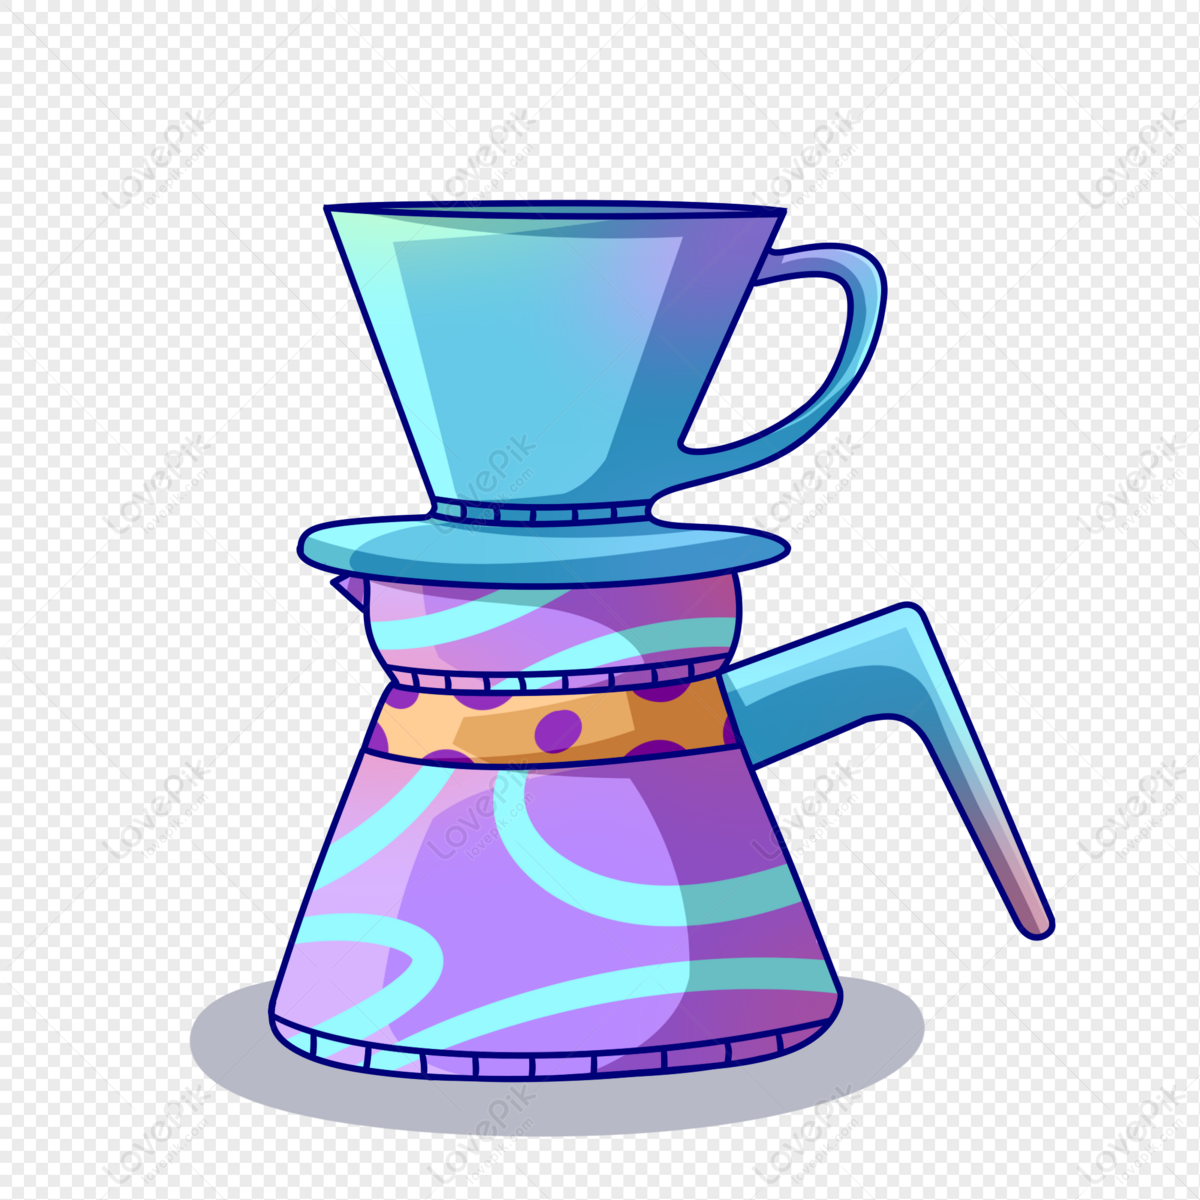 Cartoon Coffee Machine PNG Transparent And Clipart Image For Free Download  - Lovepik | 401484416